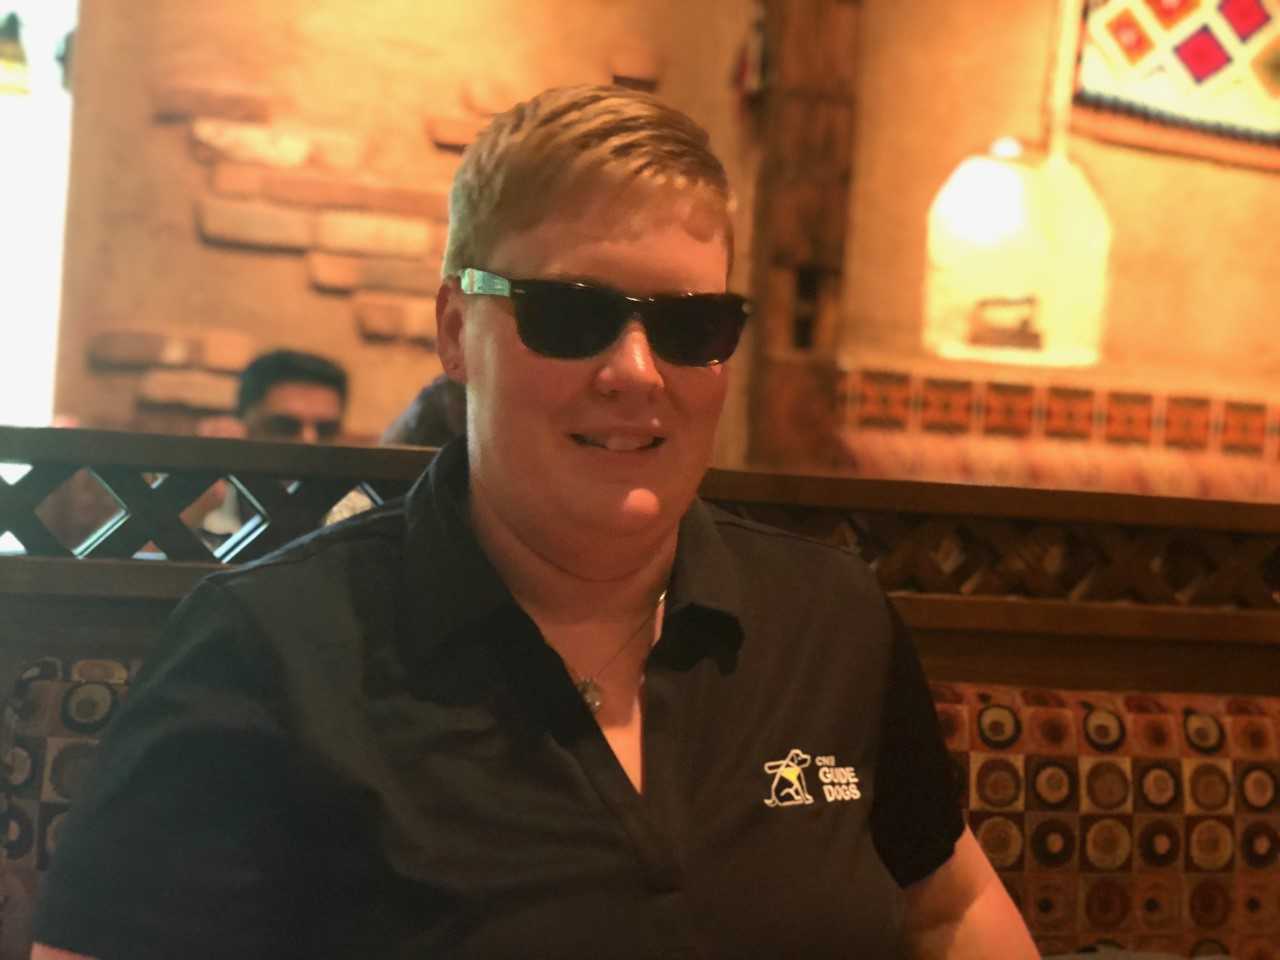 Ashley Nemeth smiles while sitting in a restaurant booth and wearing sunglasses.